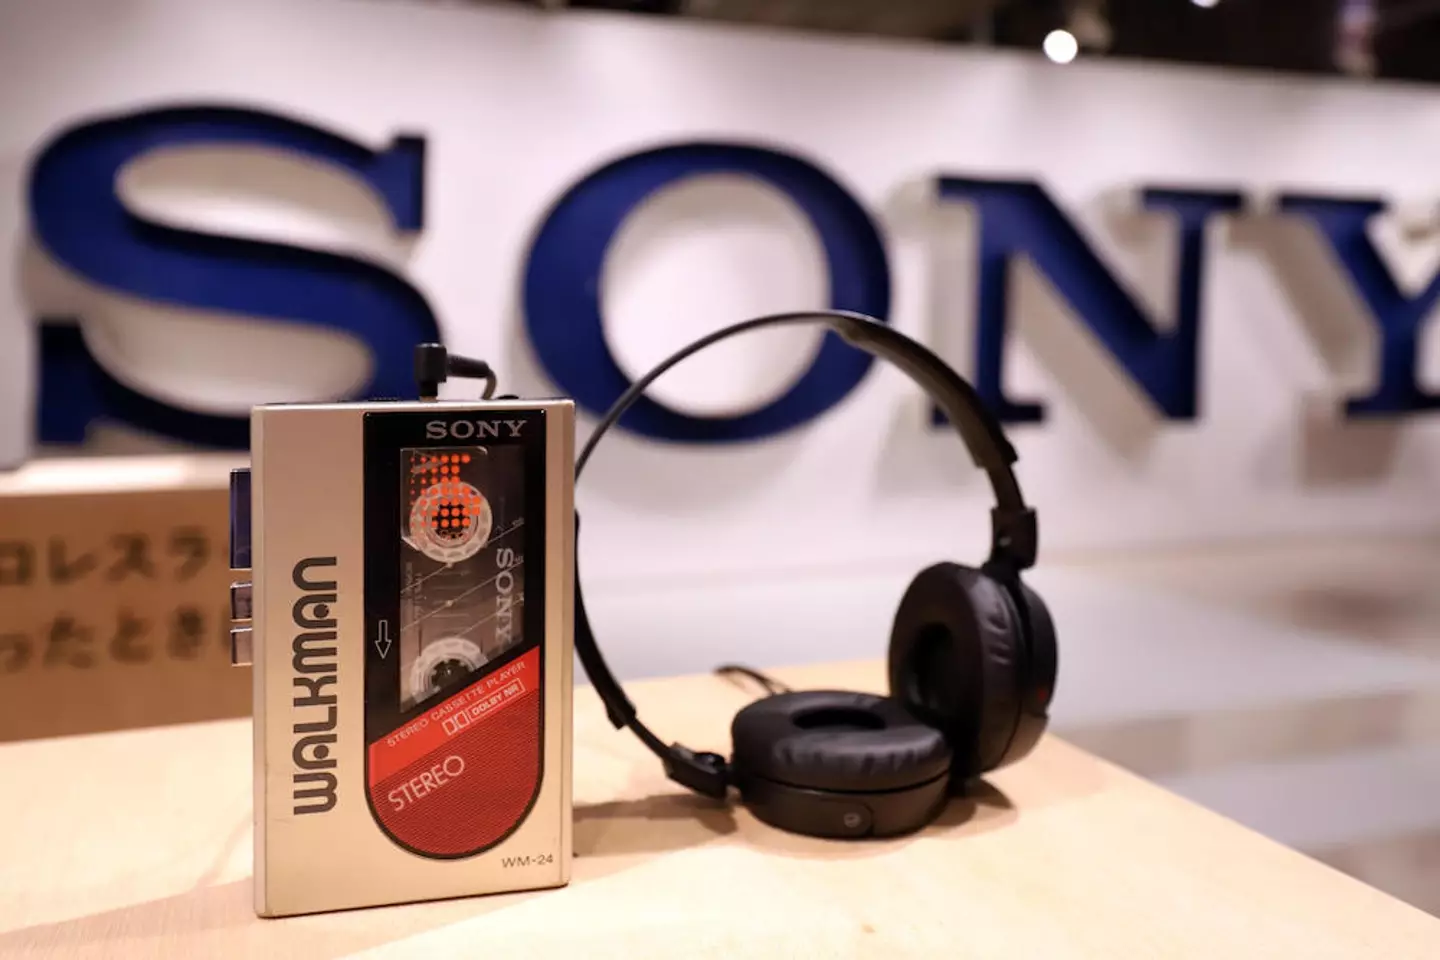 The new Walkman looks a little different to its predecessors.